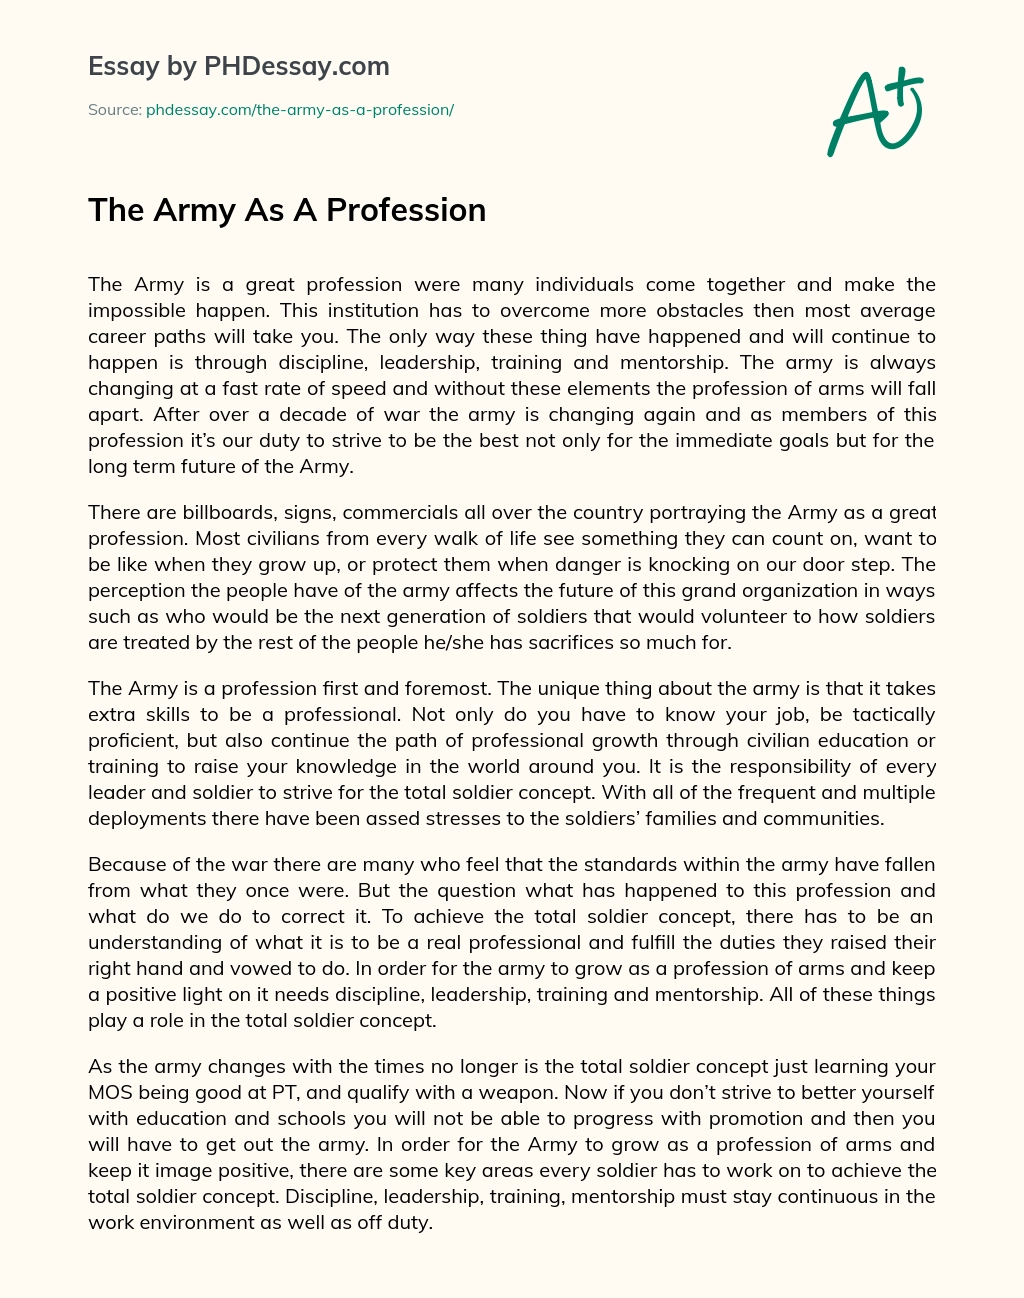 The Army As A Profession essay